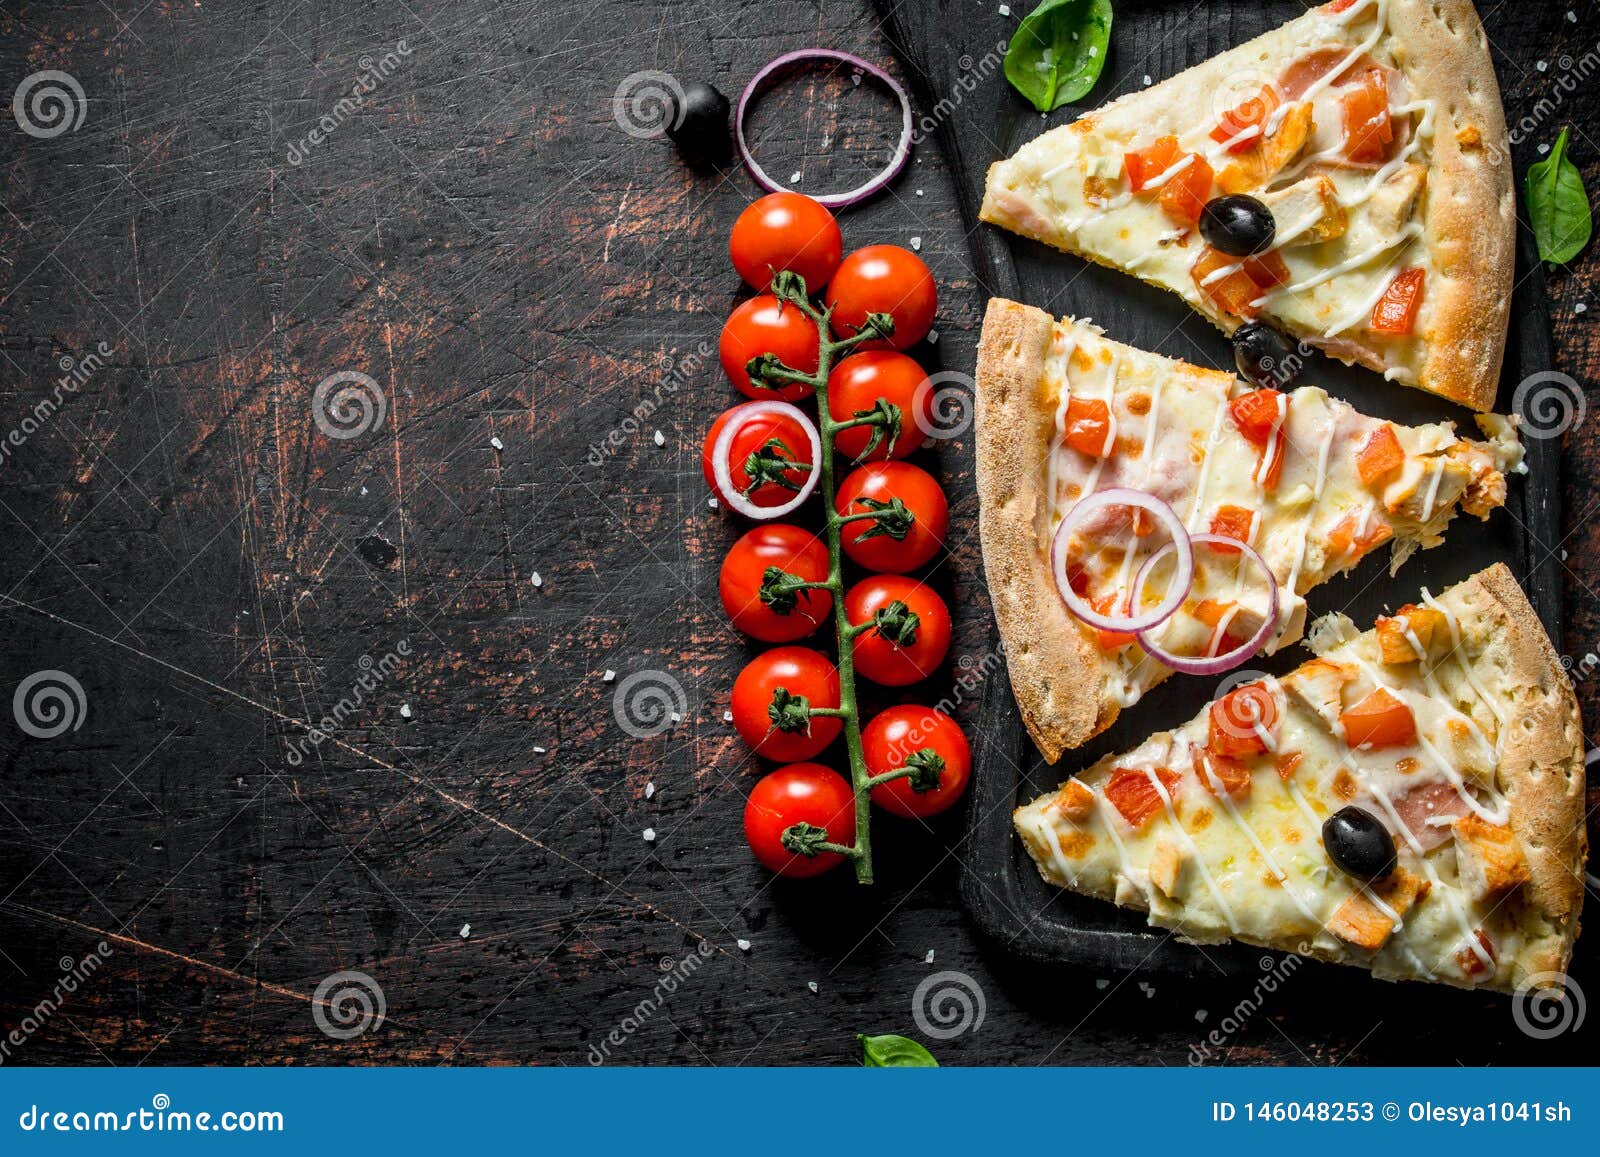 Fragrant Slices of Pizza on a Cutting Board Stock Image - Image of ...